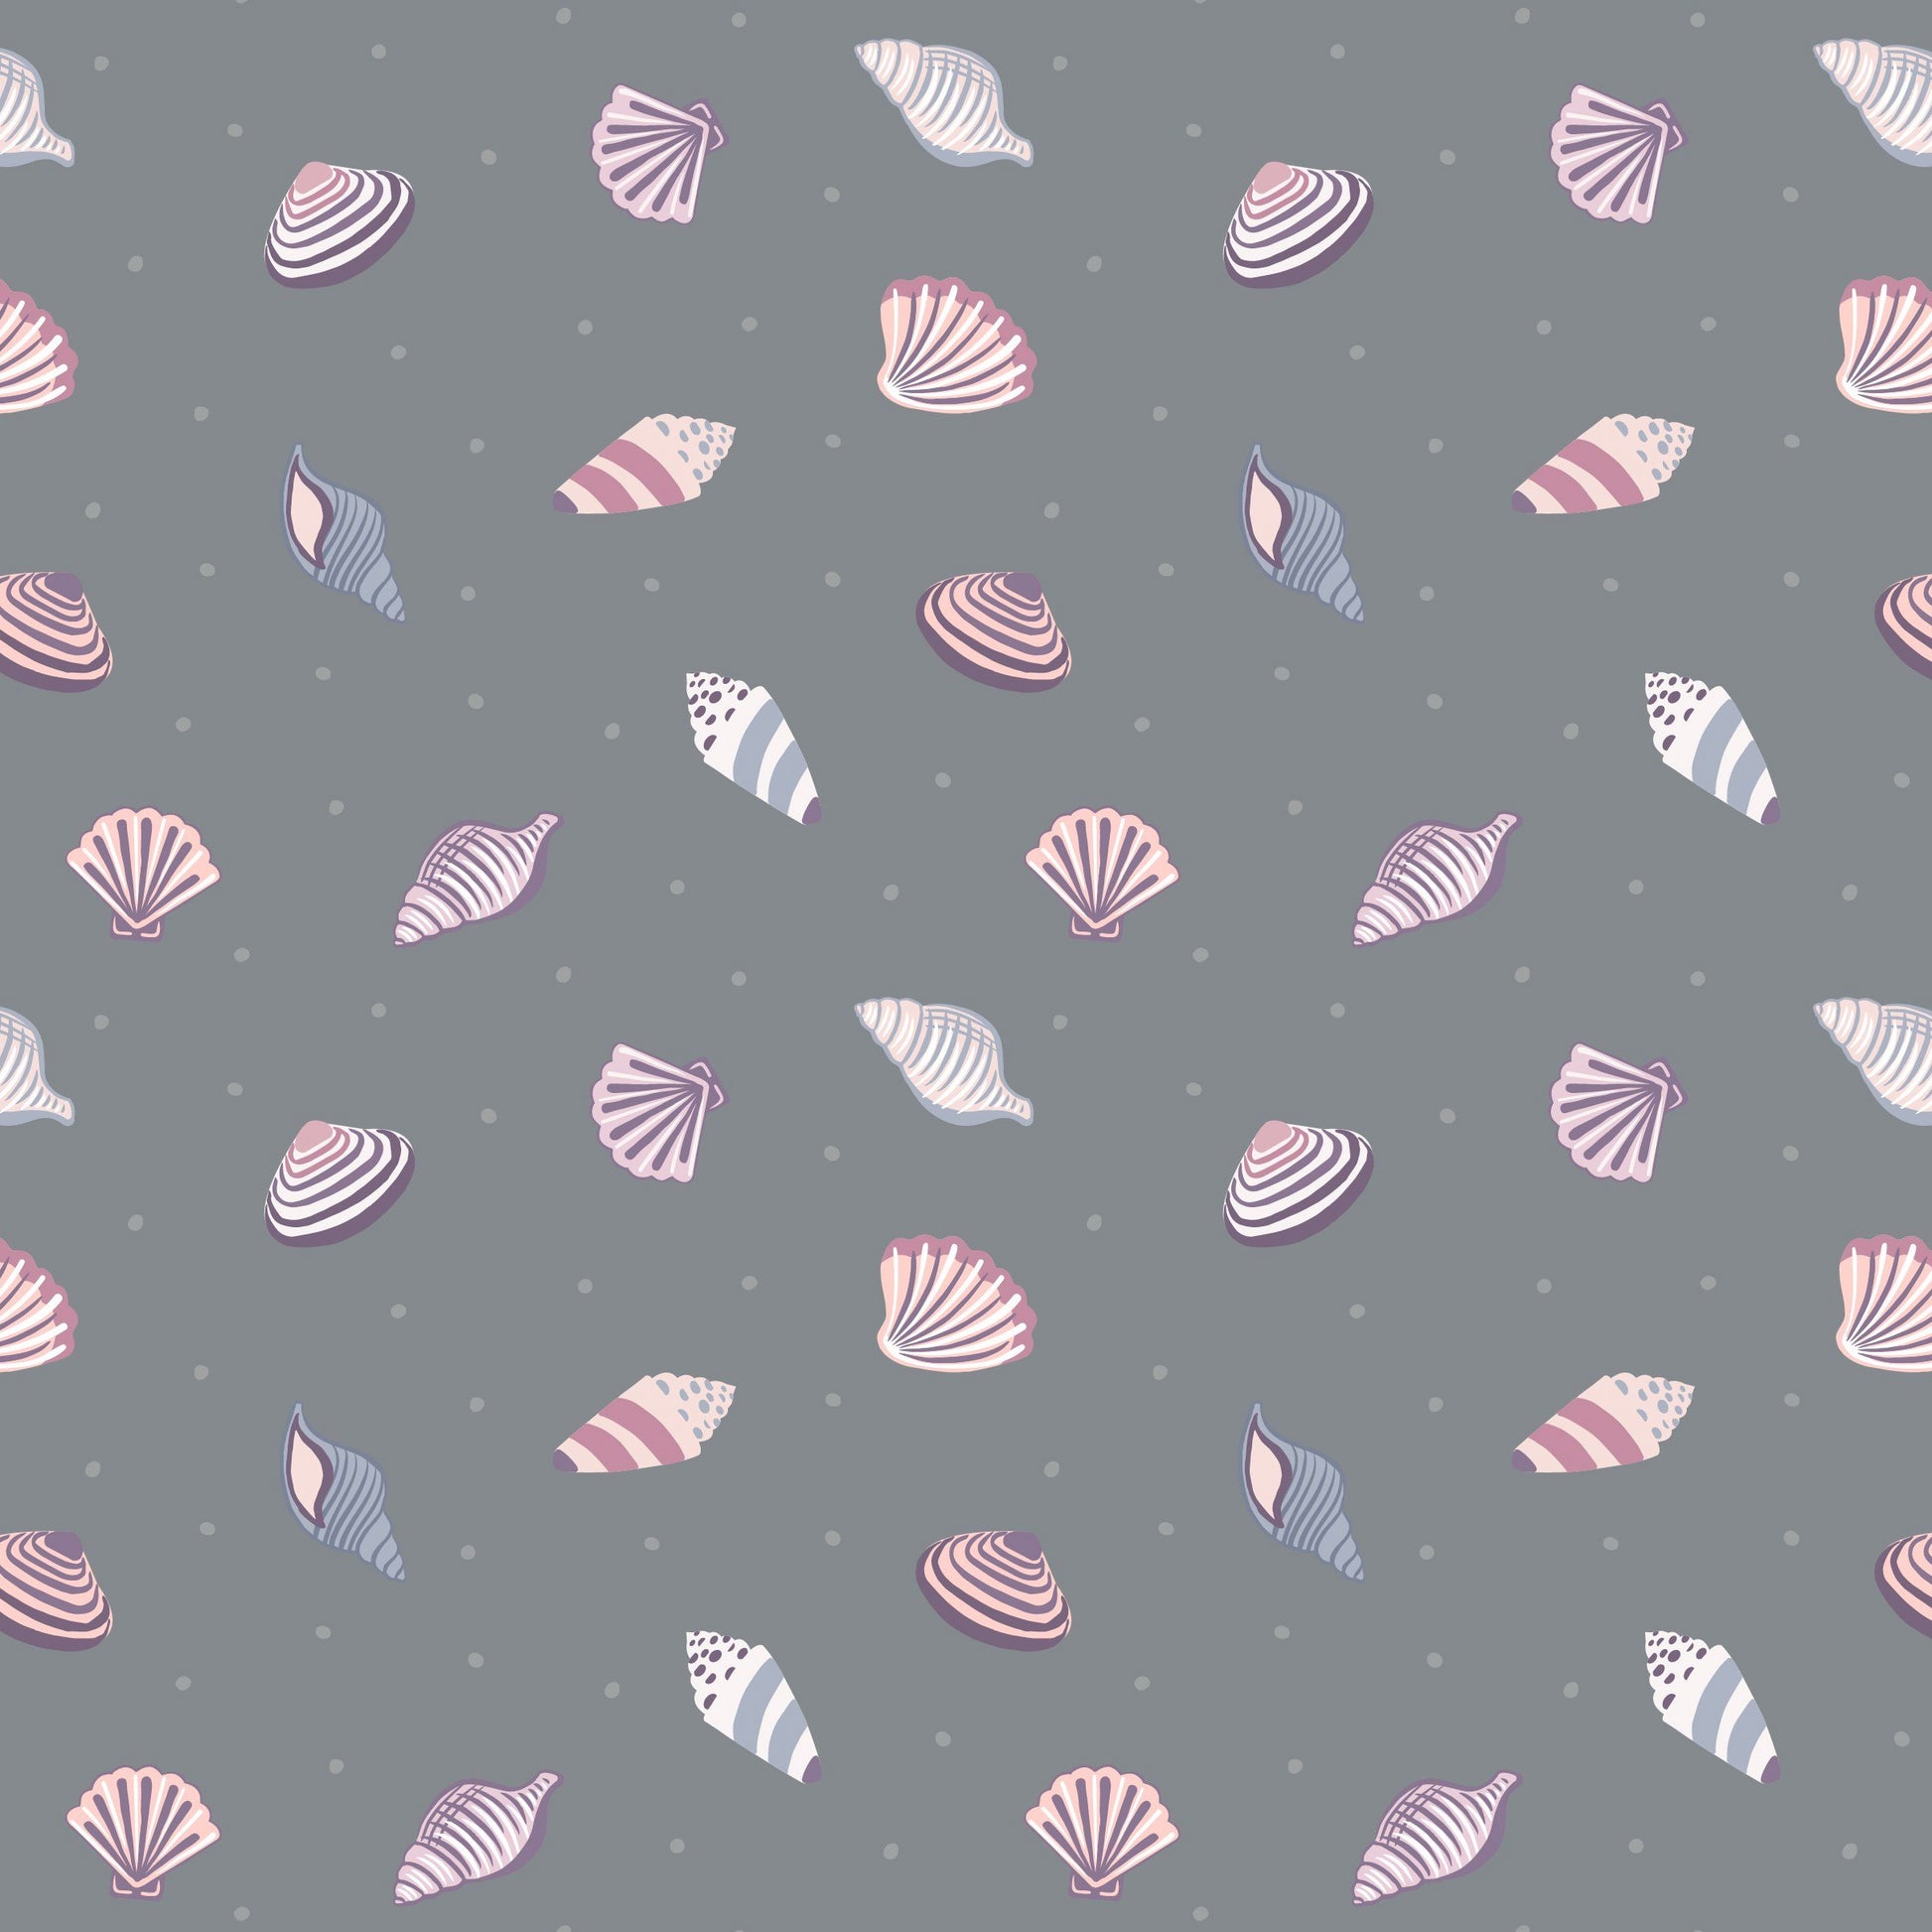 Small Things by the Sea - Shells POS Fabric - Trapunto